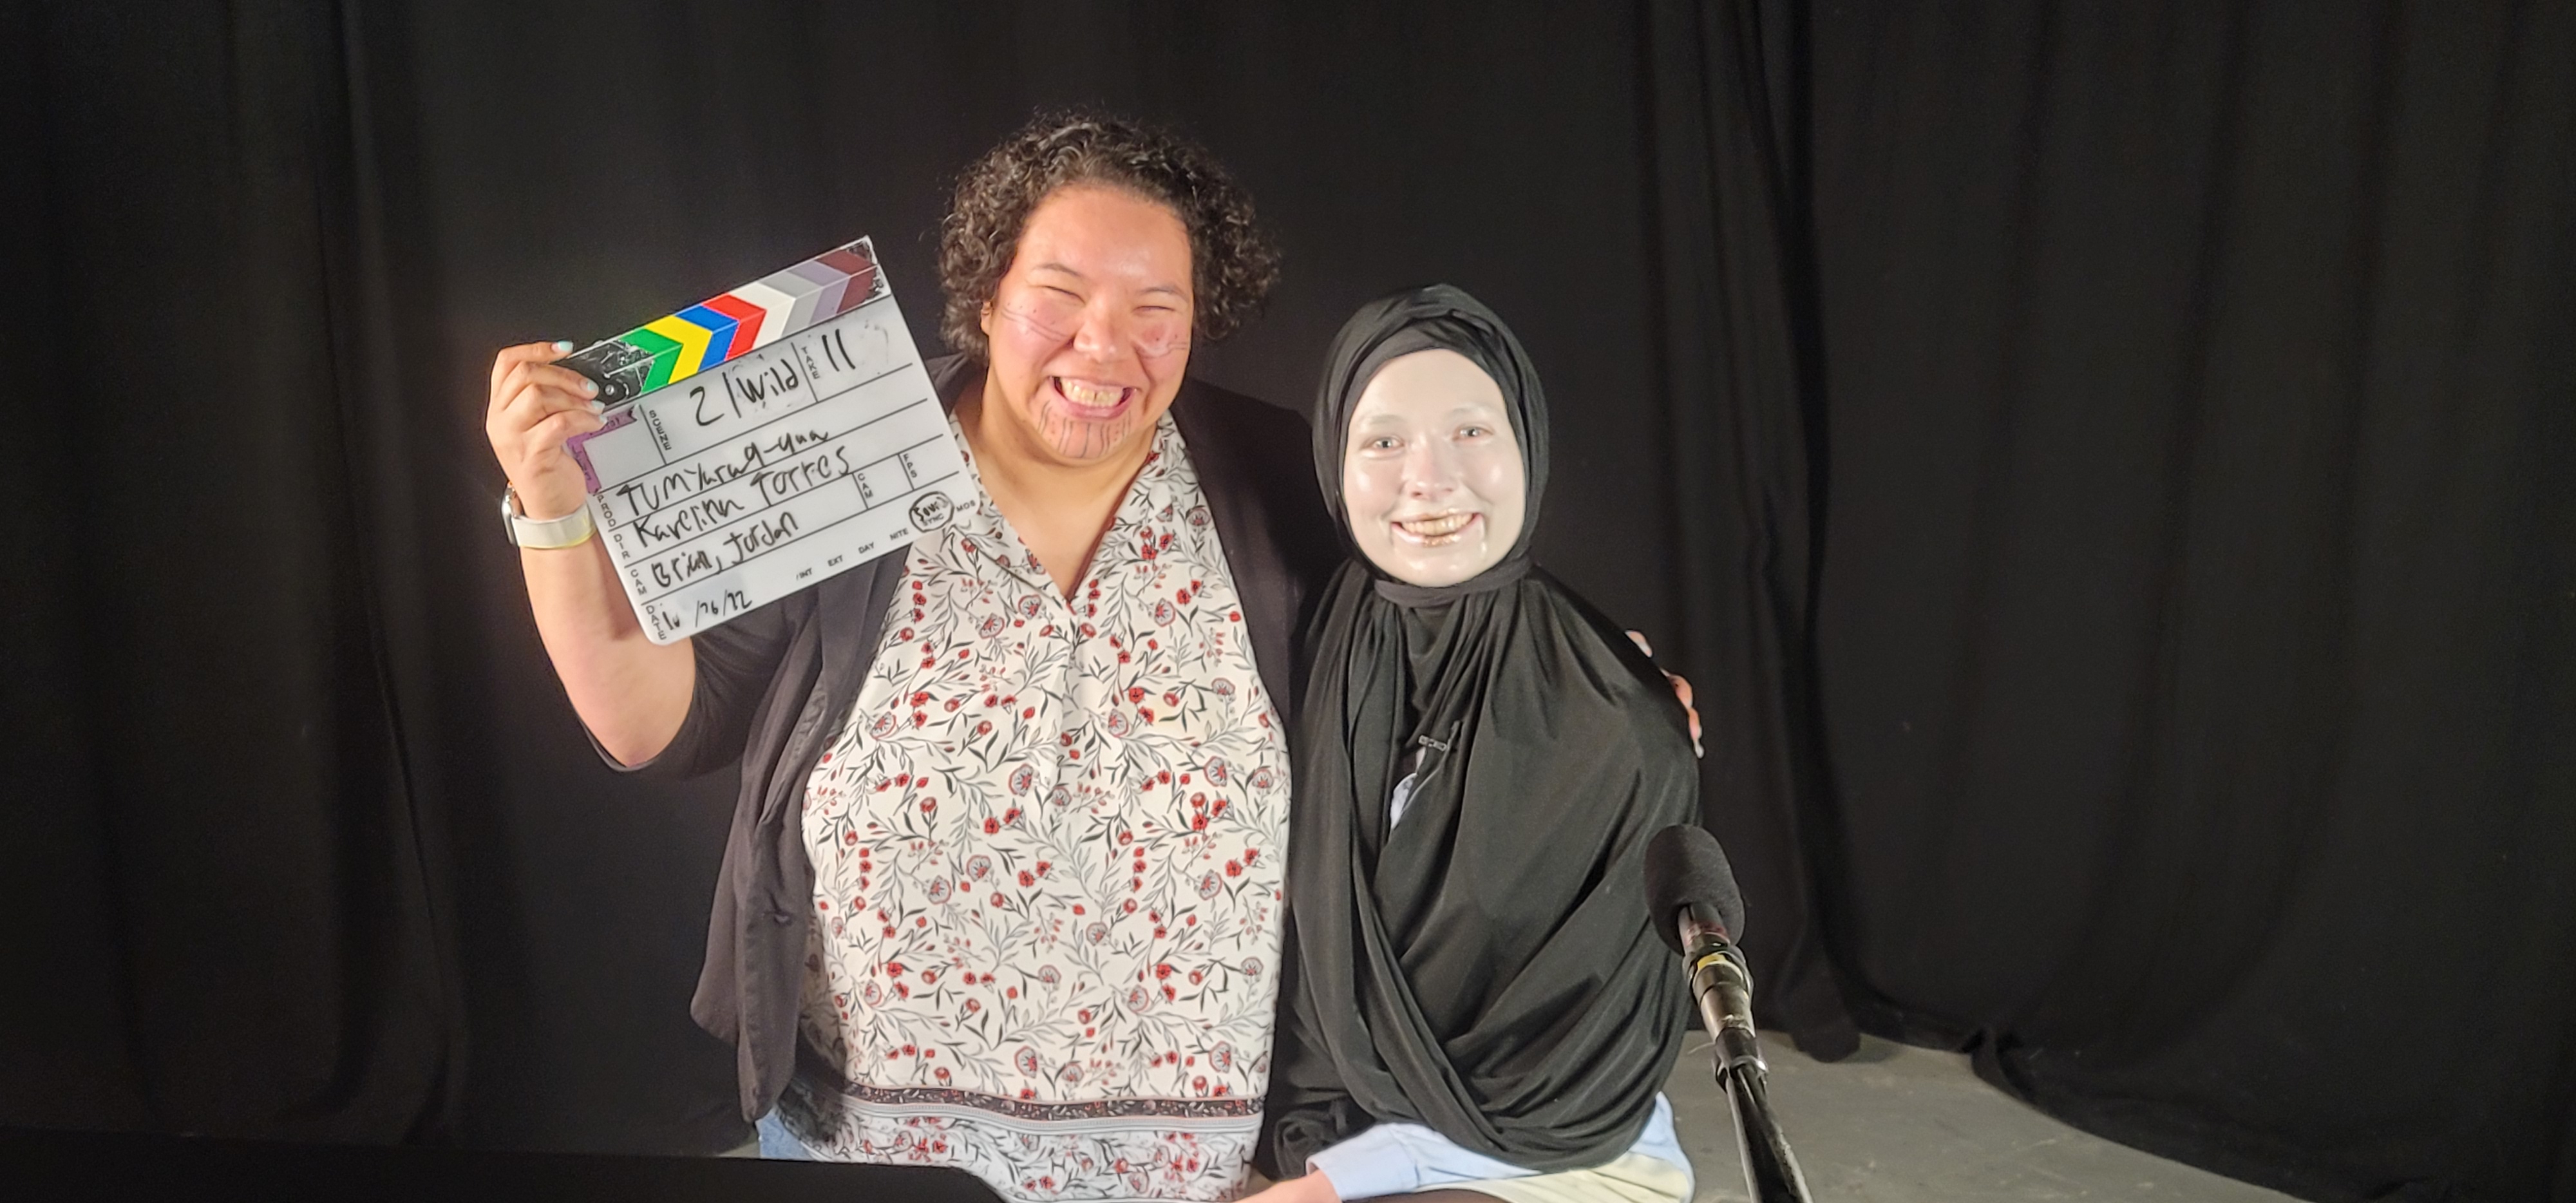 Behind the scene photos on set during the filming of the TV pilot Tumyaraq-qaa. Photo courtesy of Theatre UAF.